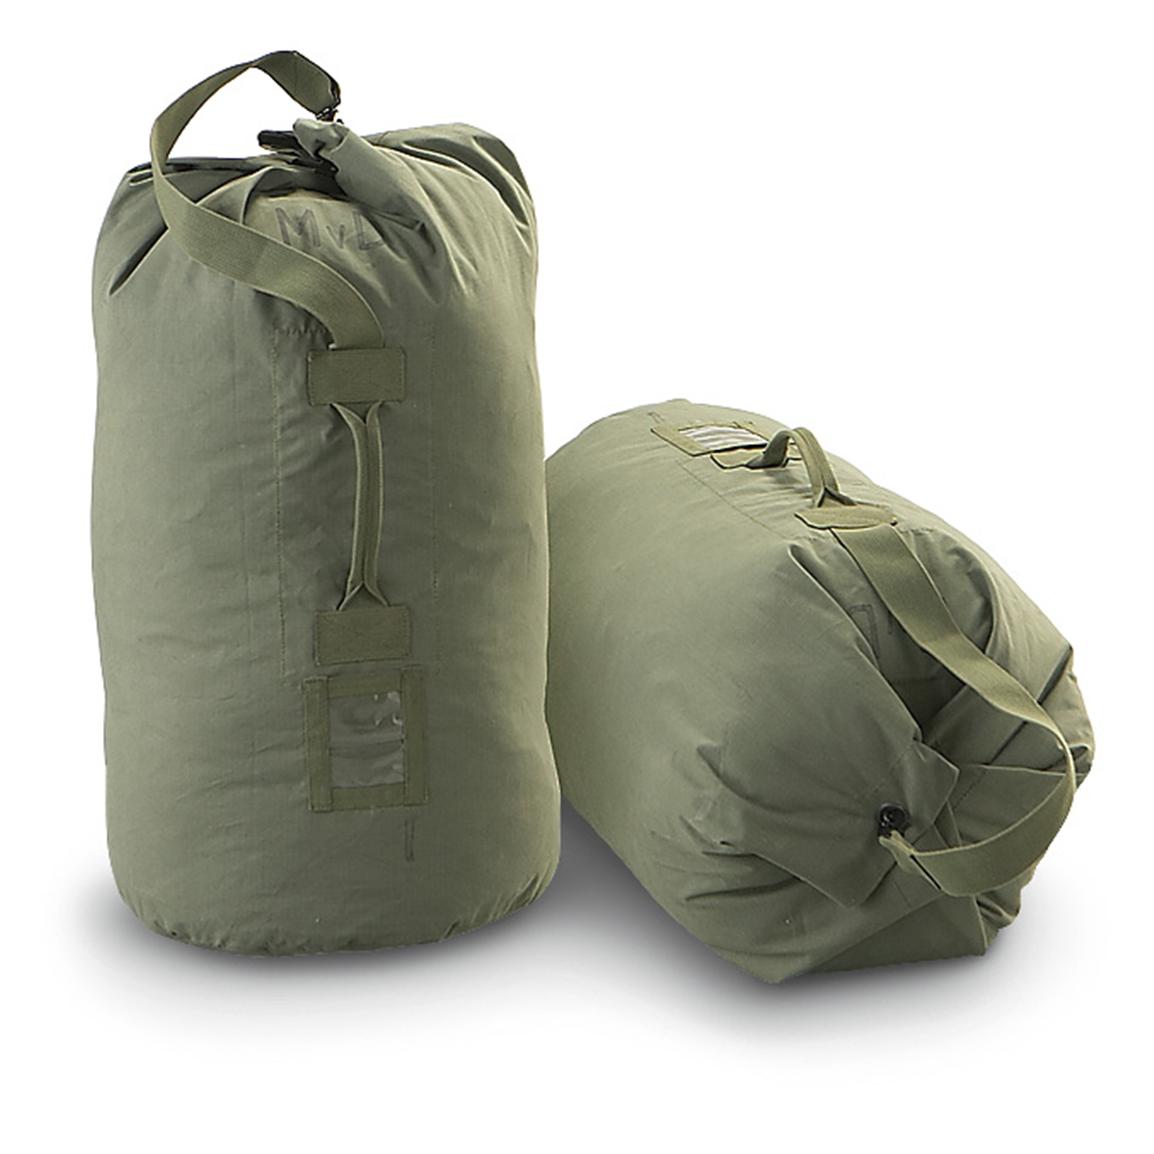 2 - Pk. Used Dutch Military Issue Ripstop Duffel Bags - 163041, Military & Camo Duffle Bags at ...